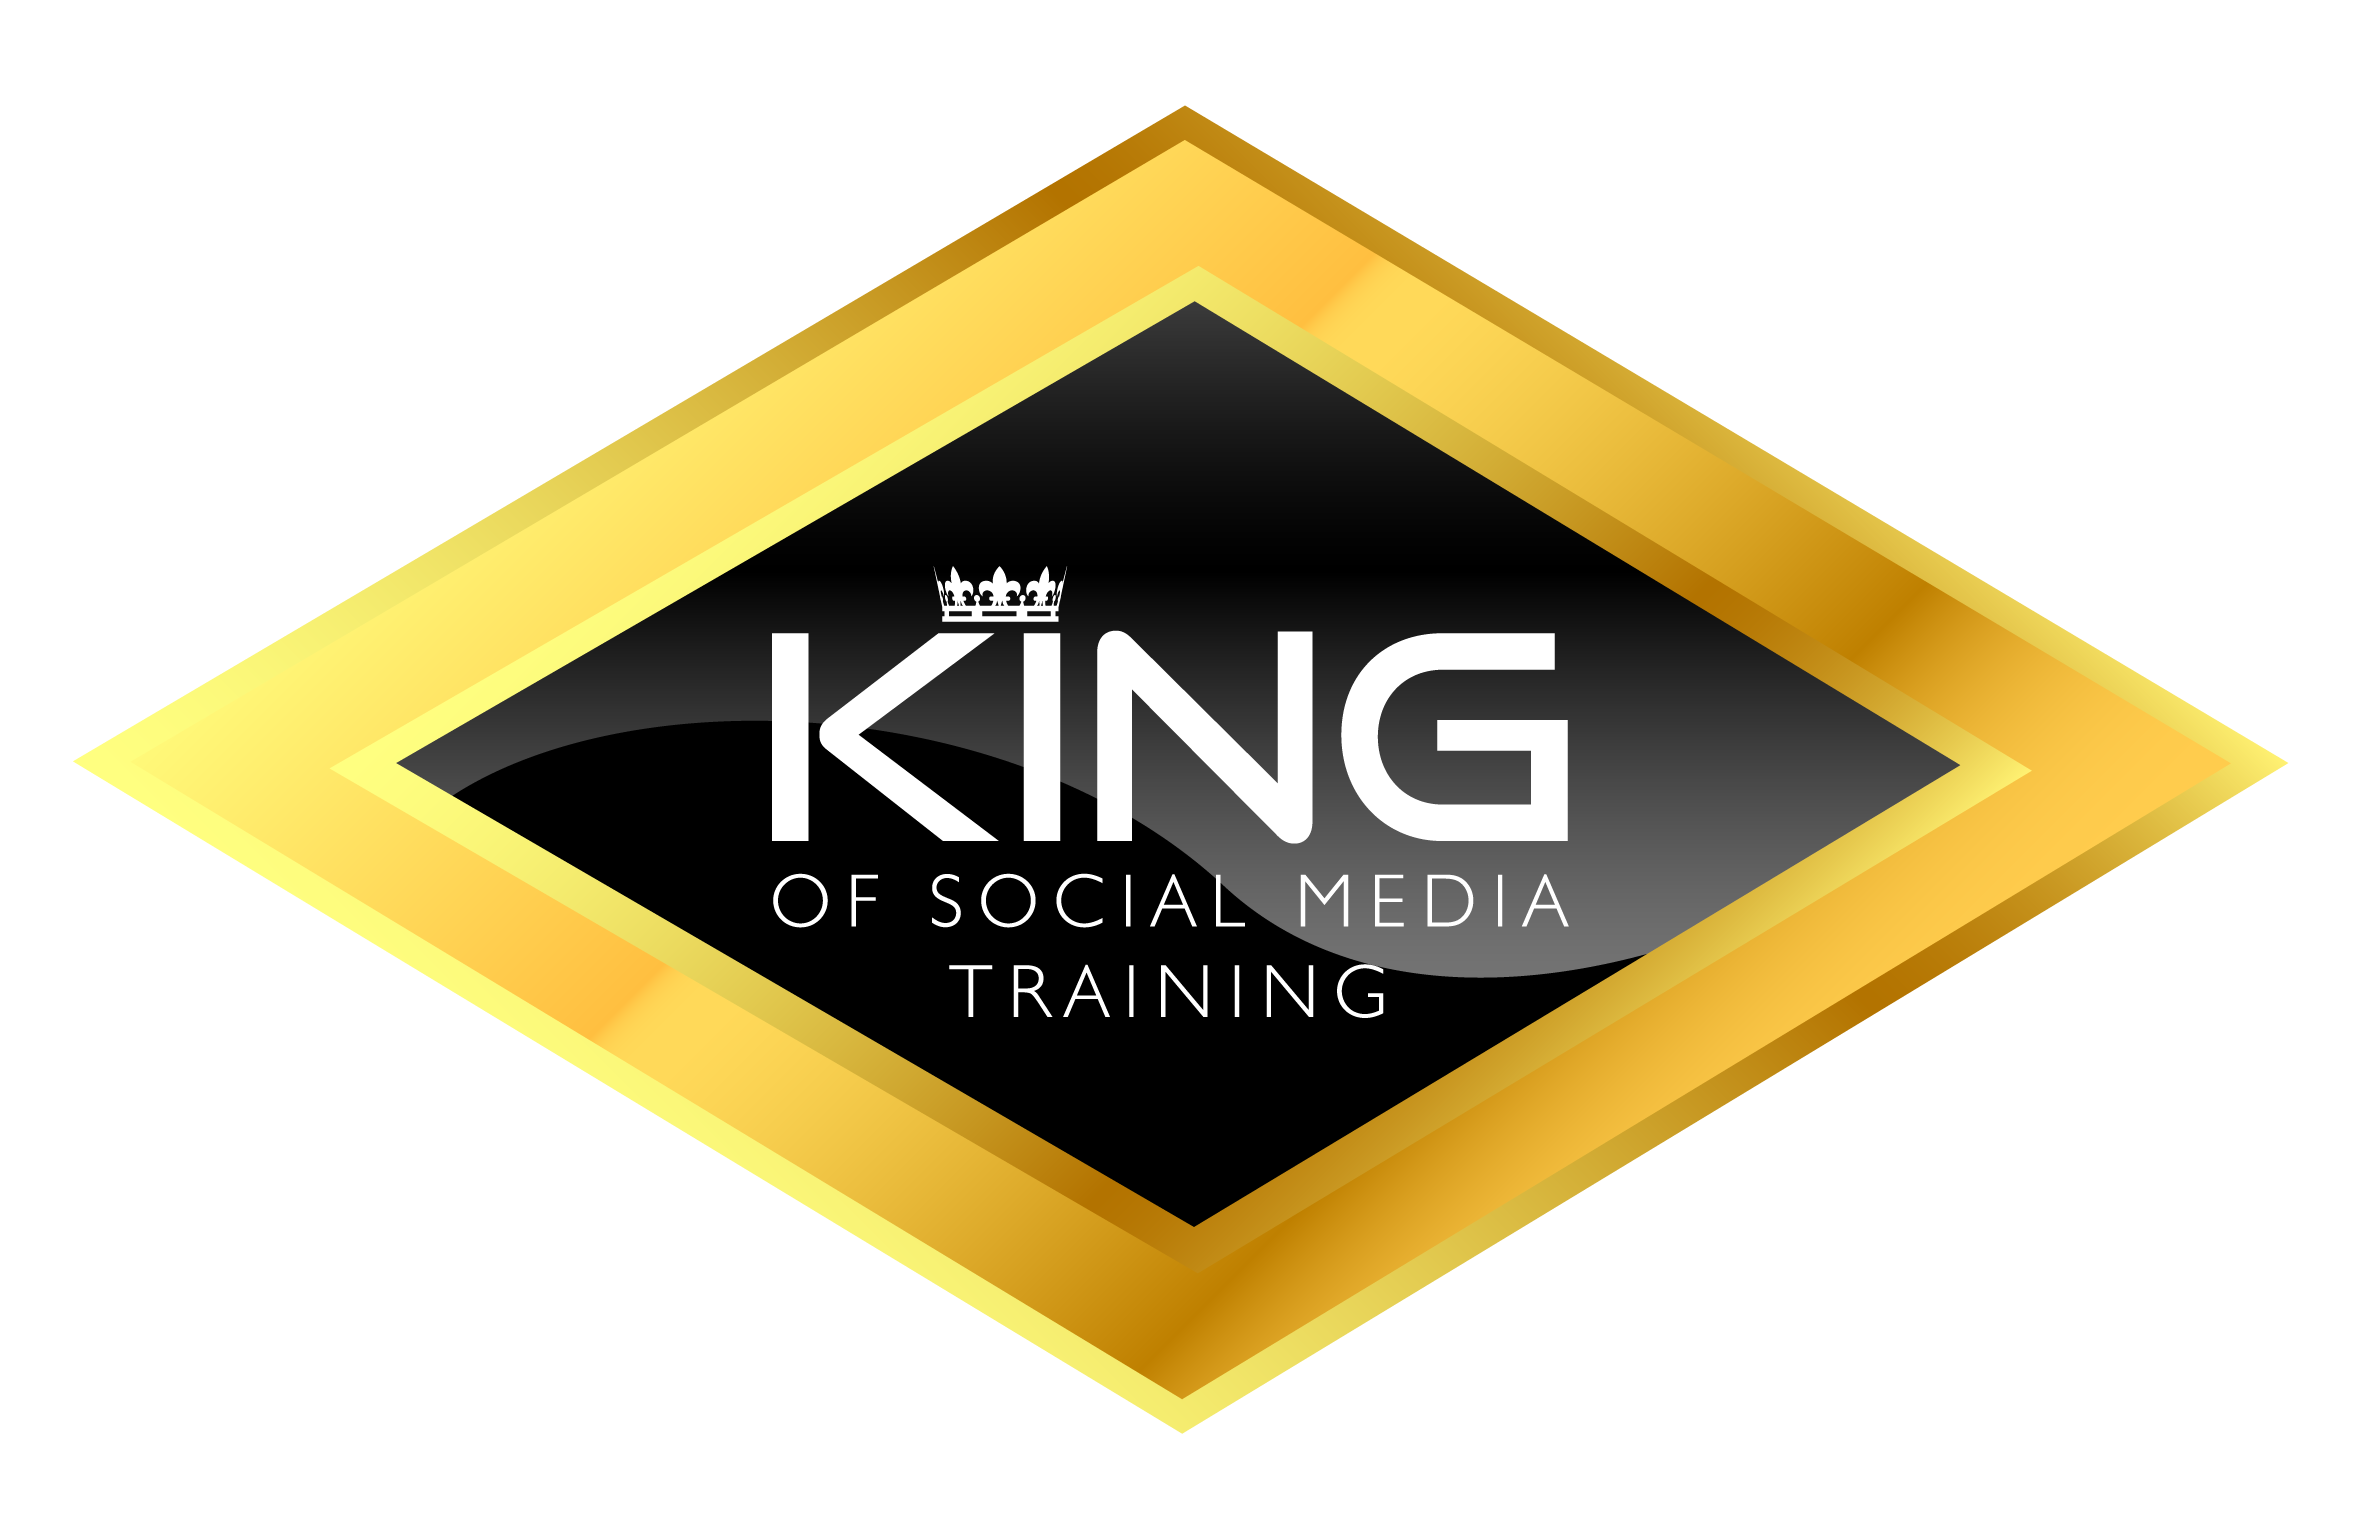 NEWS: Altrincham HQ has been named the King Of Social Media Training